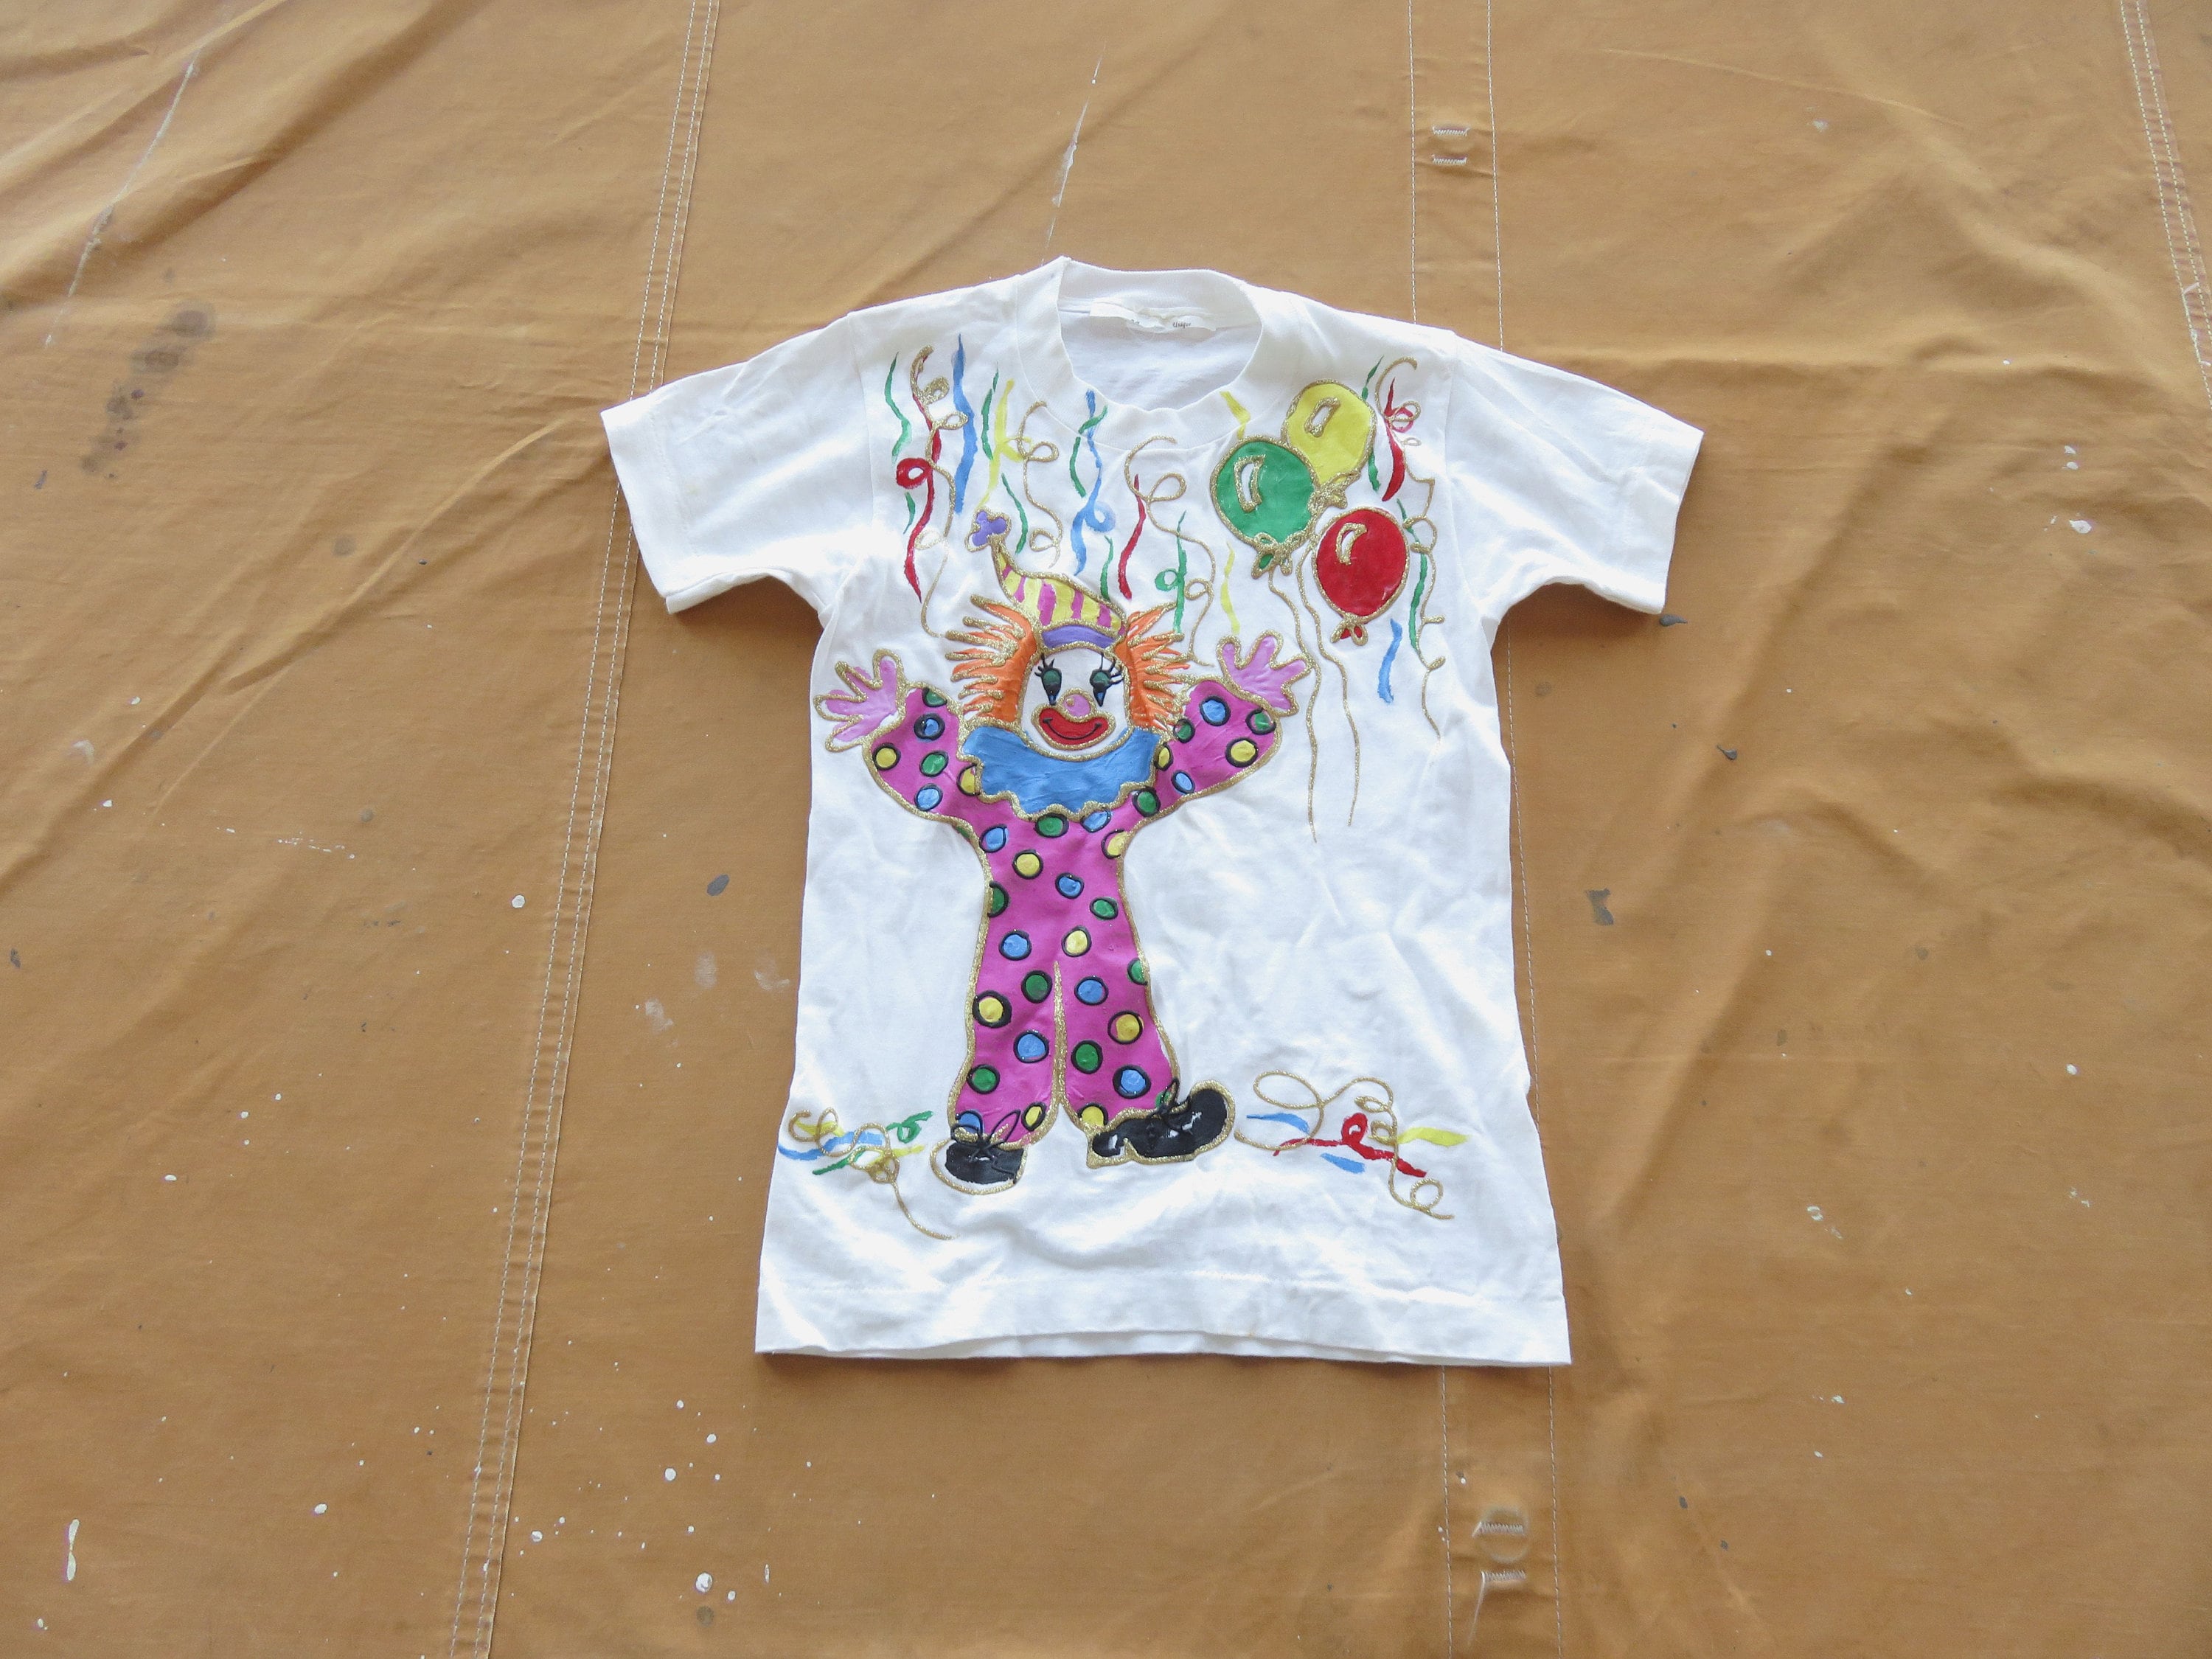 T-shirts Decorated With Puffy Paint - PaintSewGlueChew